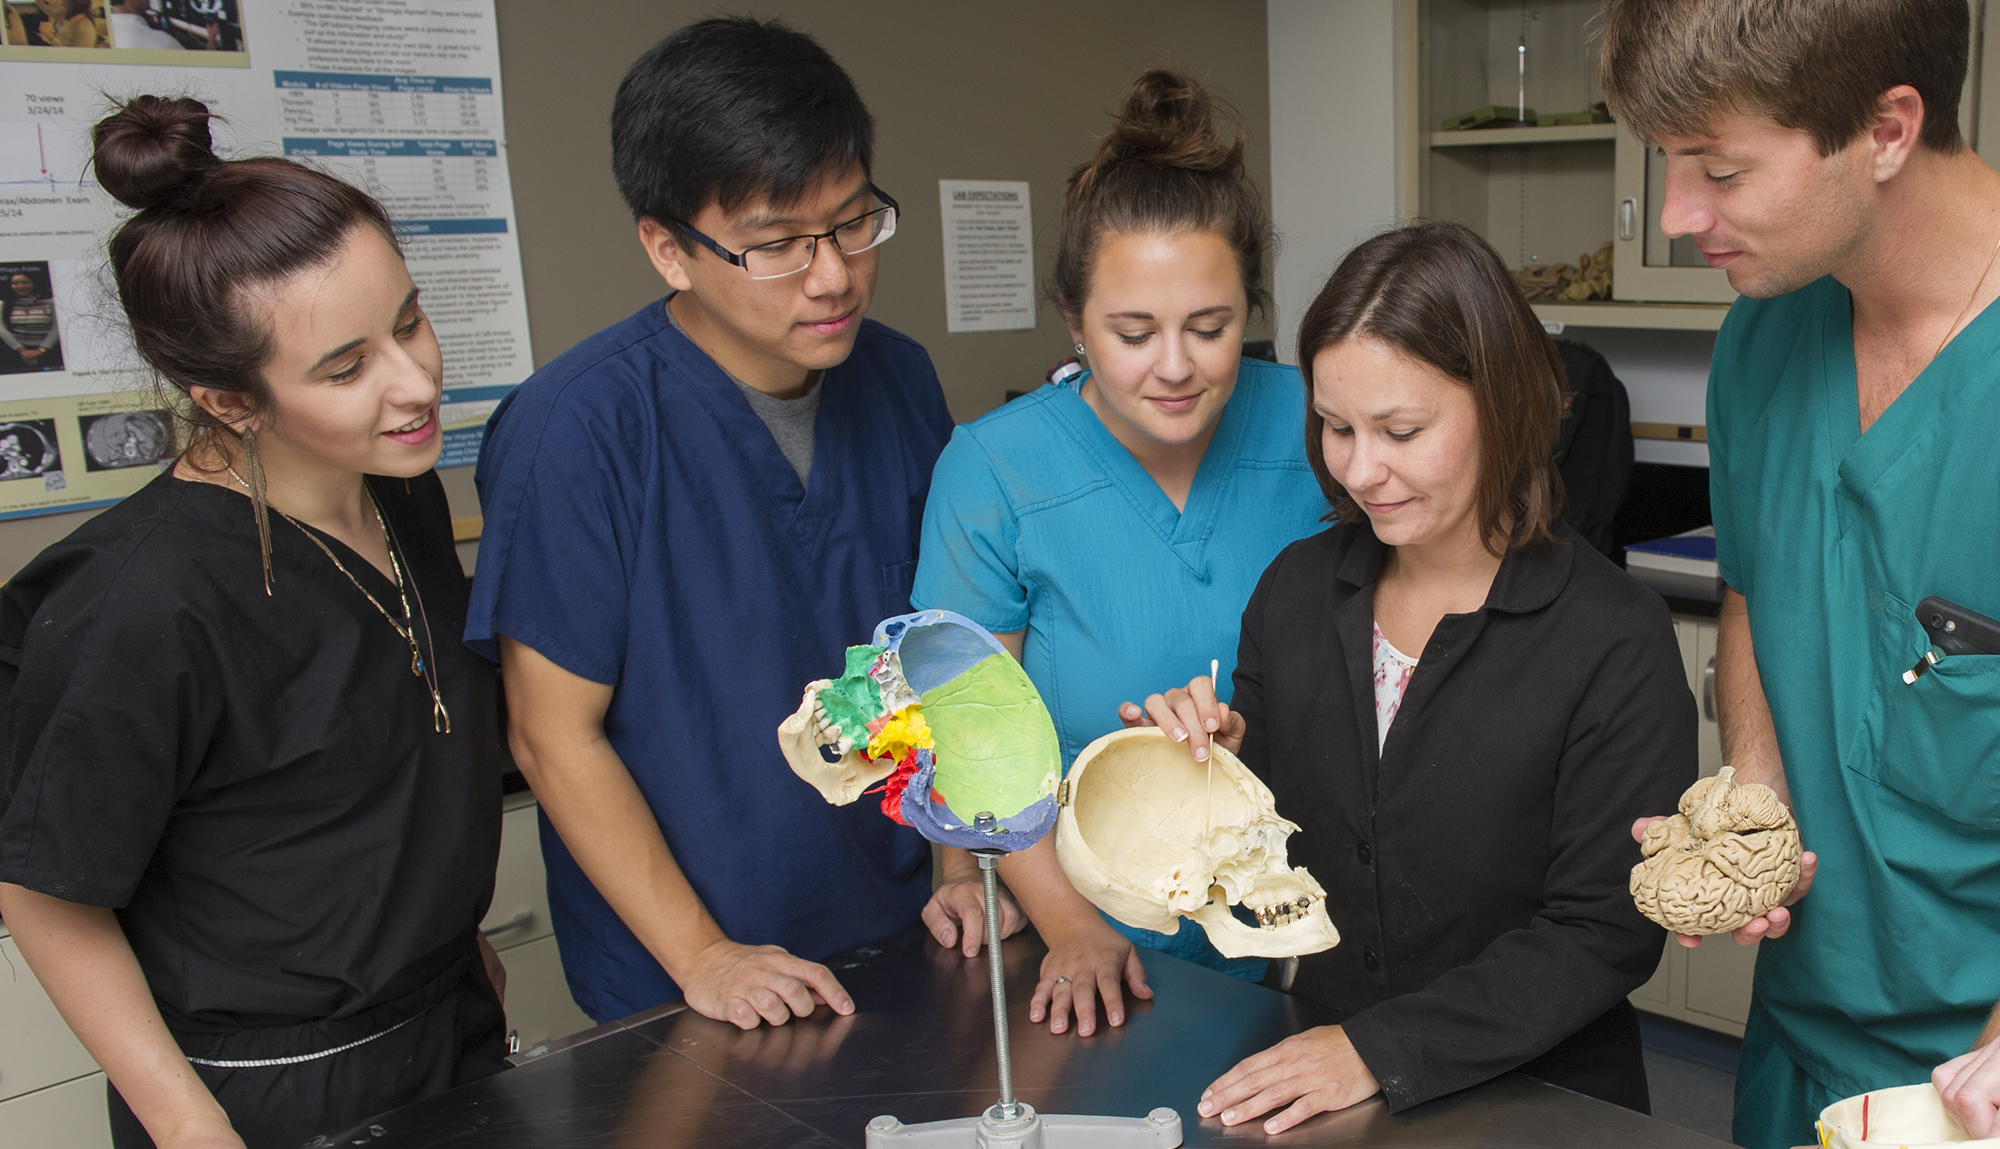 Dr. Carrie Elzie and students examine an anatomy model of the skull.